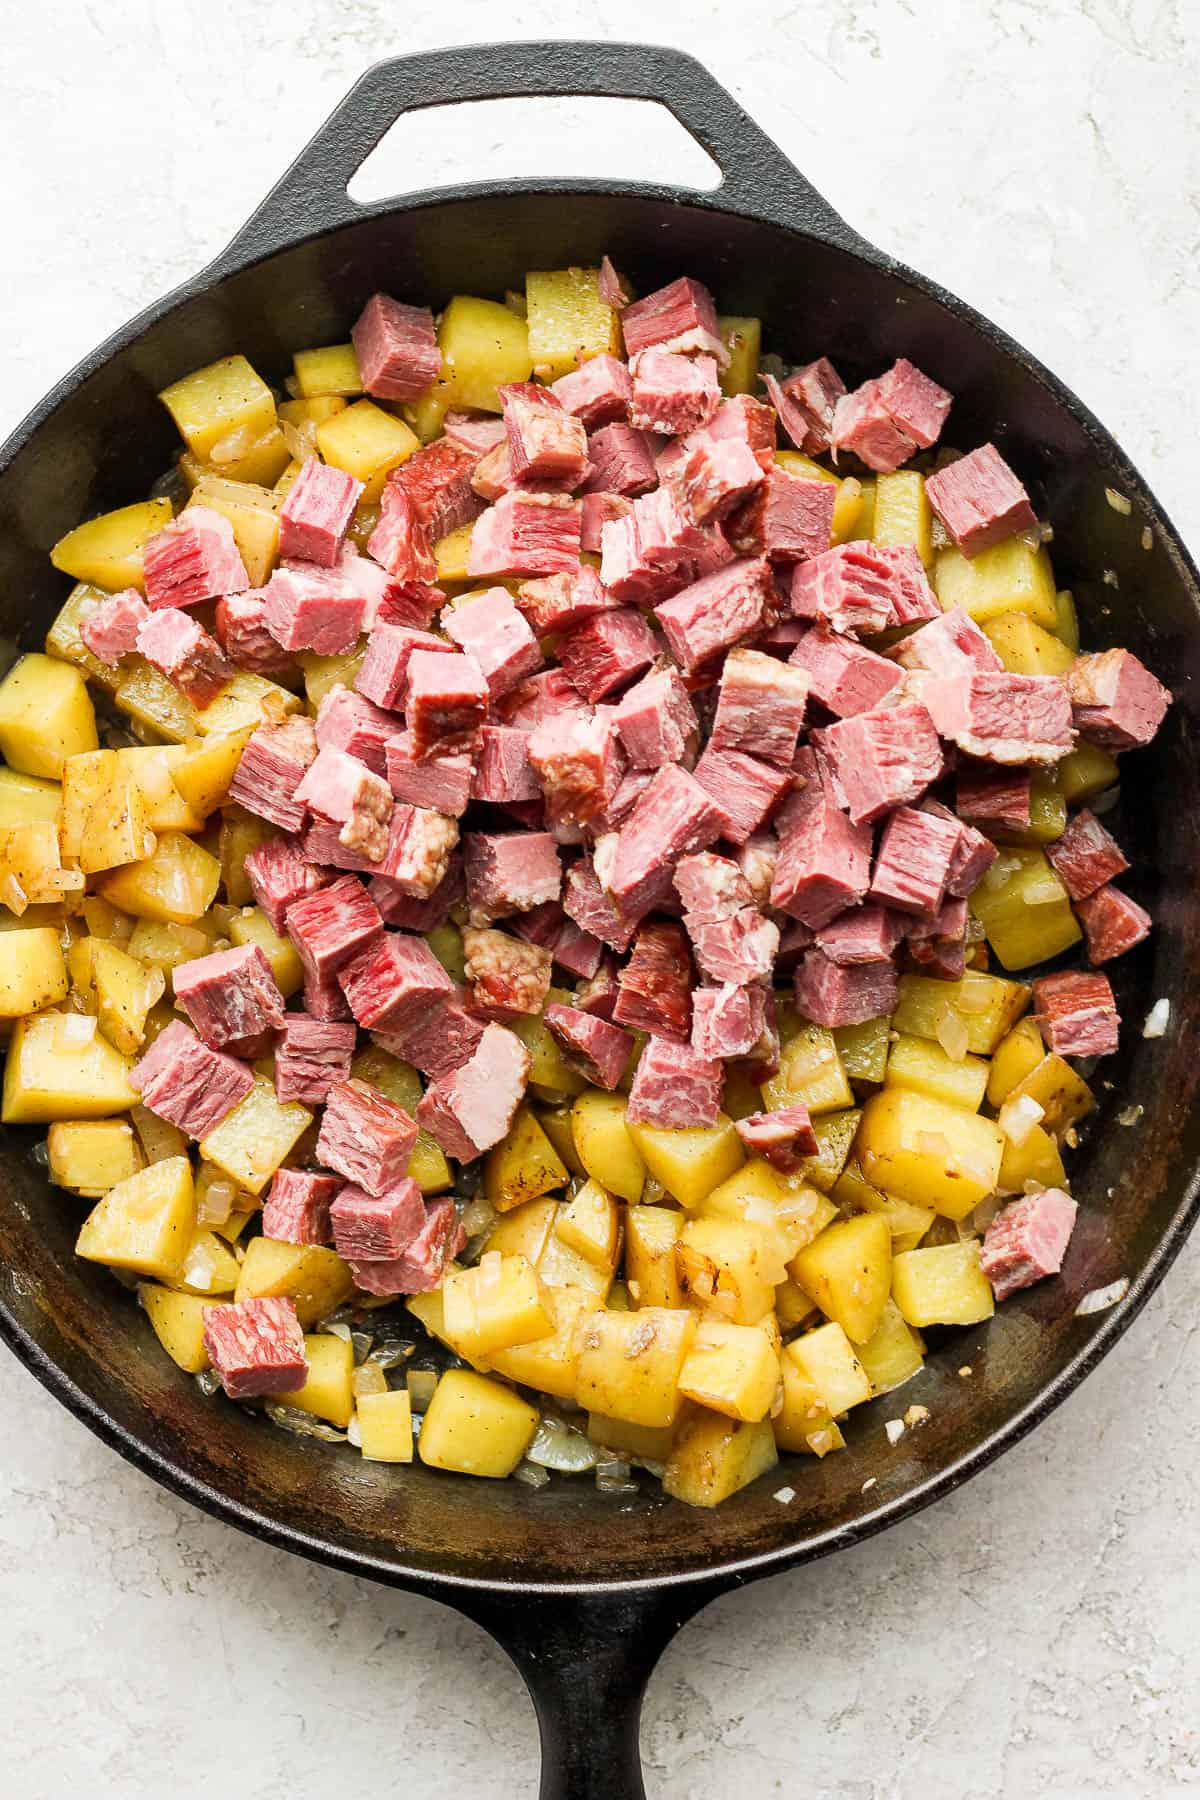 Corned beef added on top of the cubed potatoes.